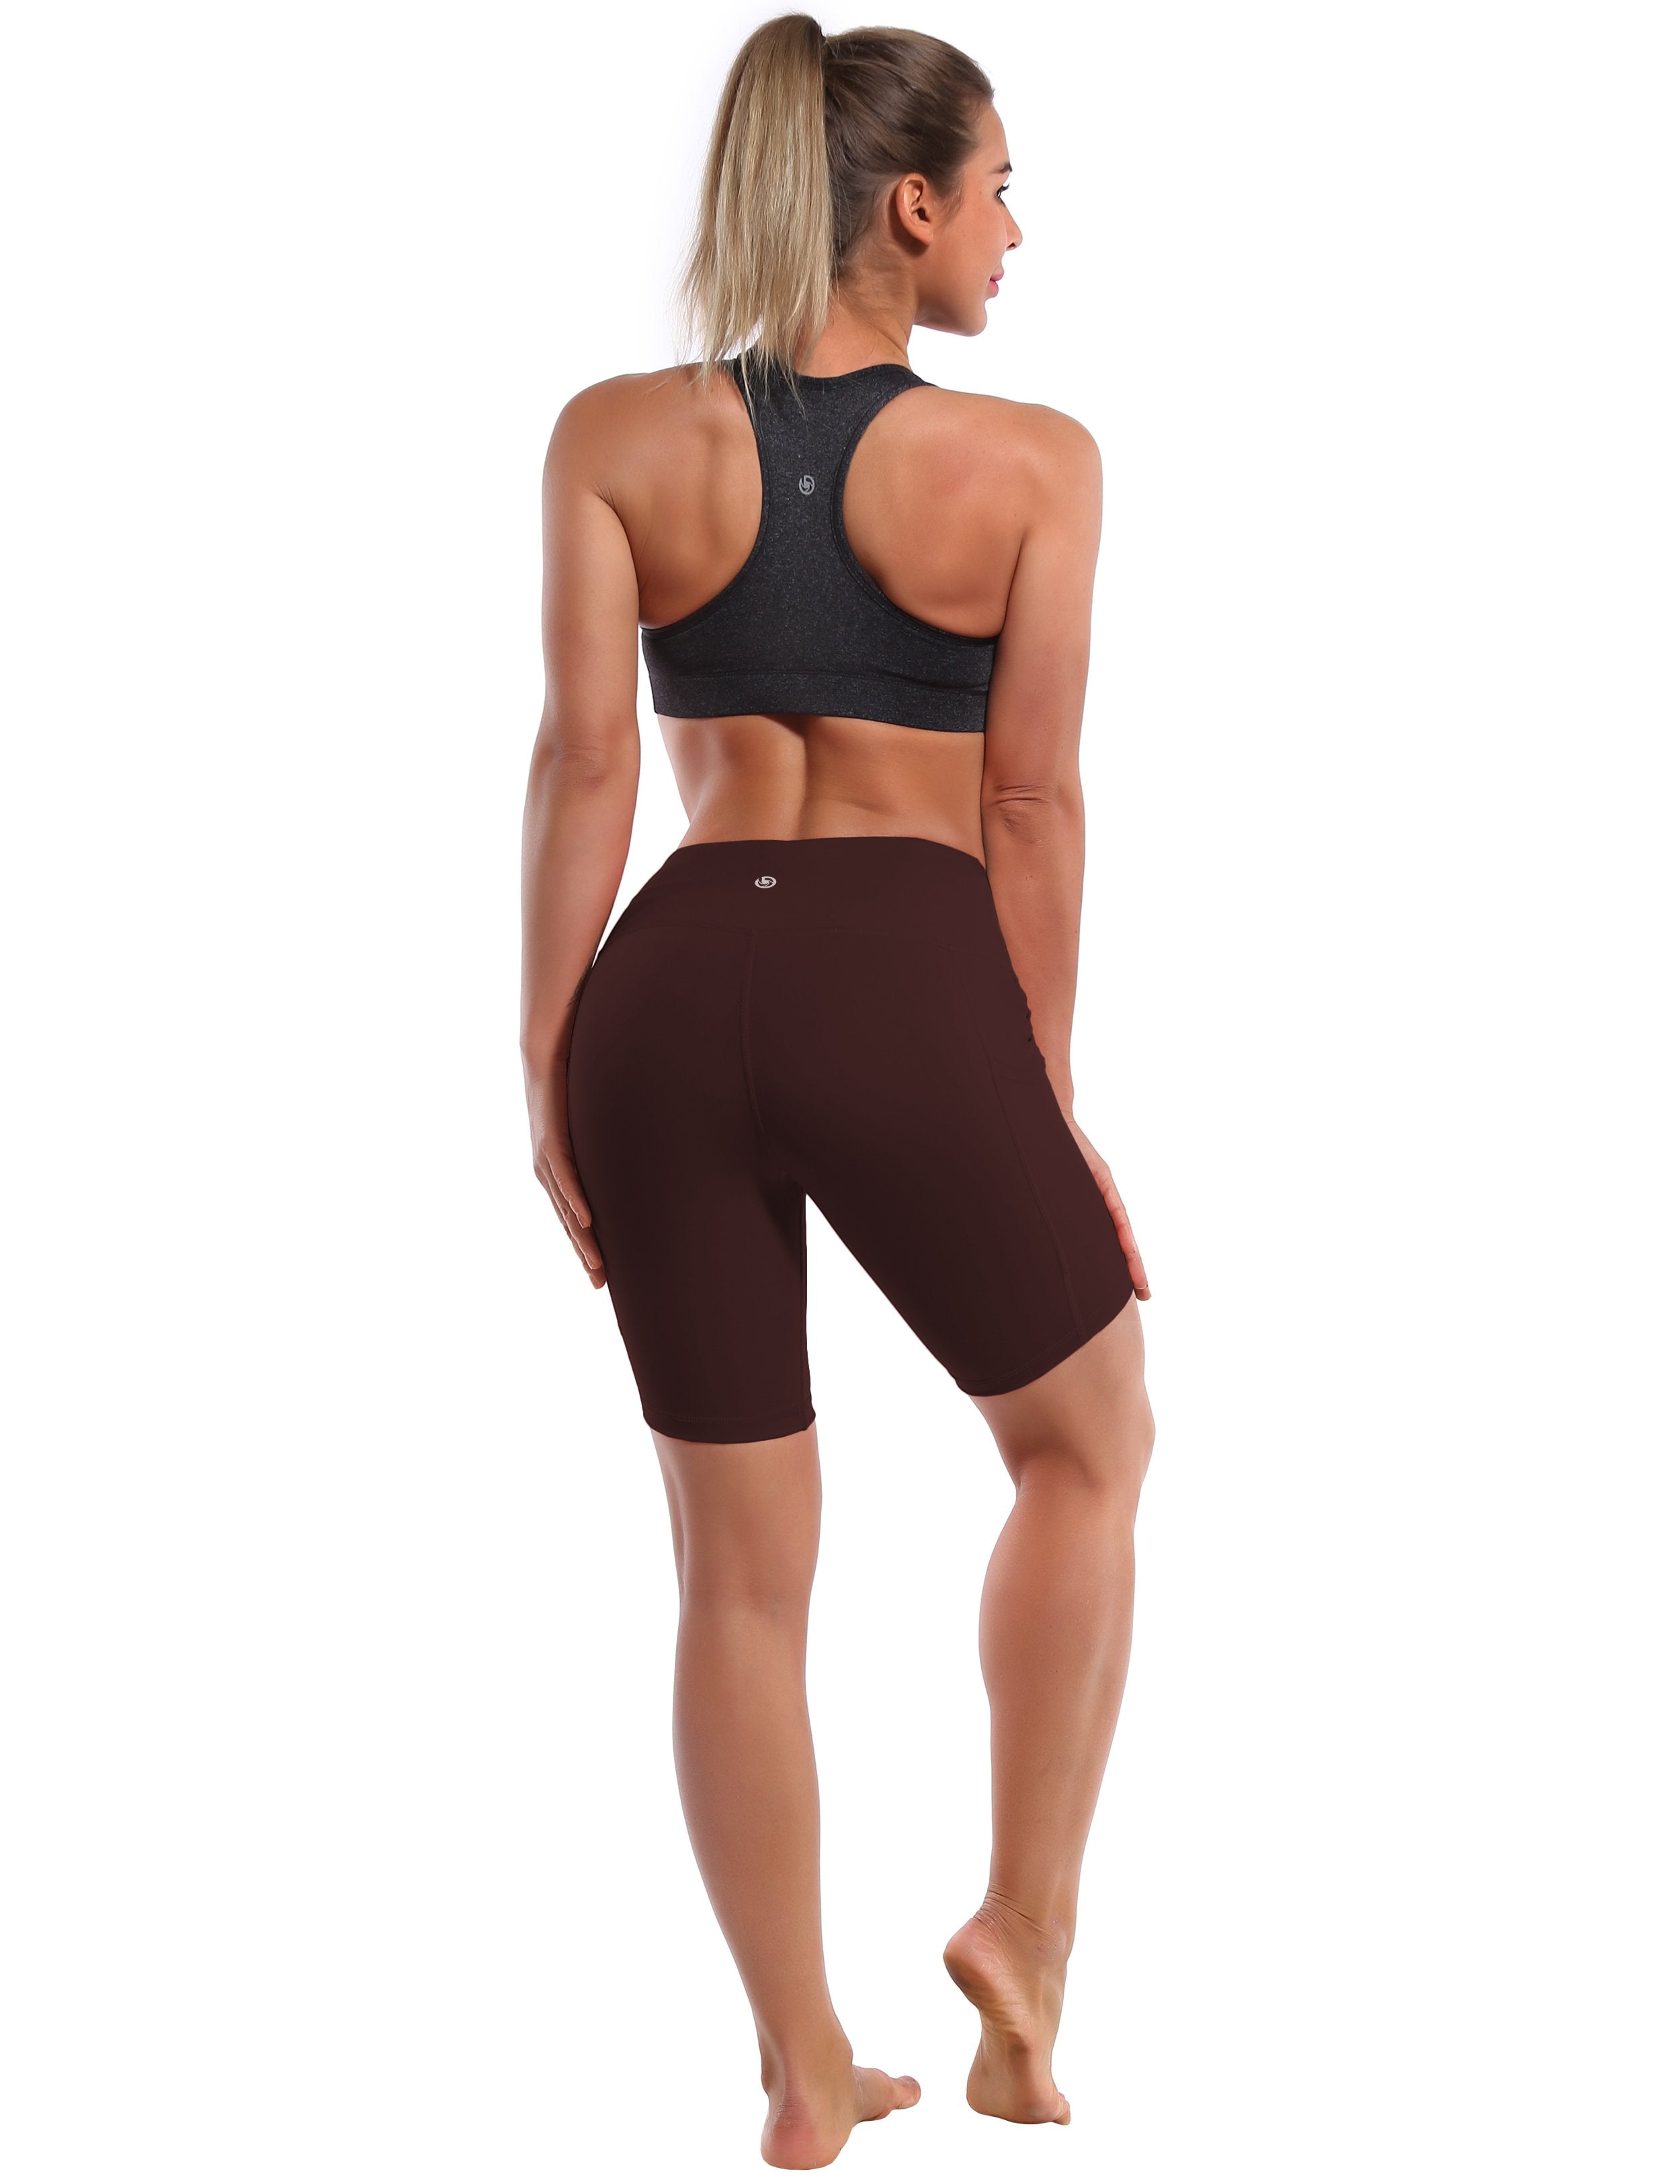 8" Side Pockets Jogging Shorts mahoganymaroon Sleek, soft, smooth and totally comfortable: our newest style is here. Softest-ever fabric High elasticity High density 4-way stretch Fabric doesn't attract lint easily No see-through Moisture-wicking Machine wash 75% Nylon, 25% Spandex